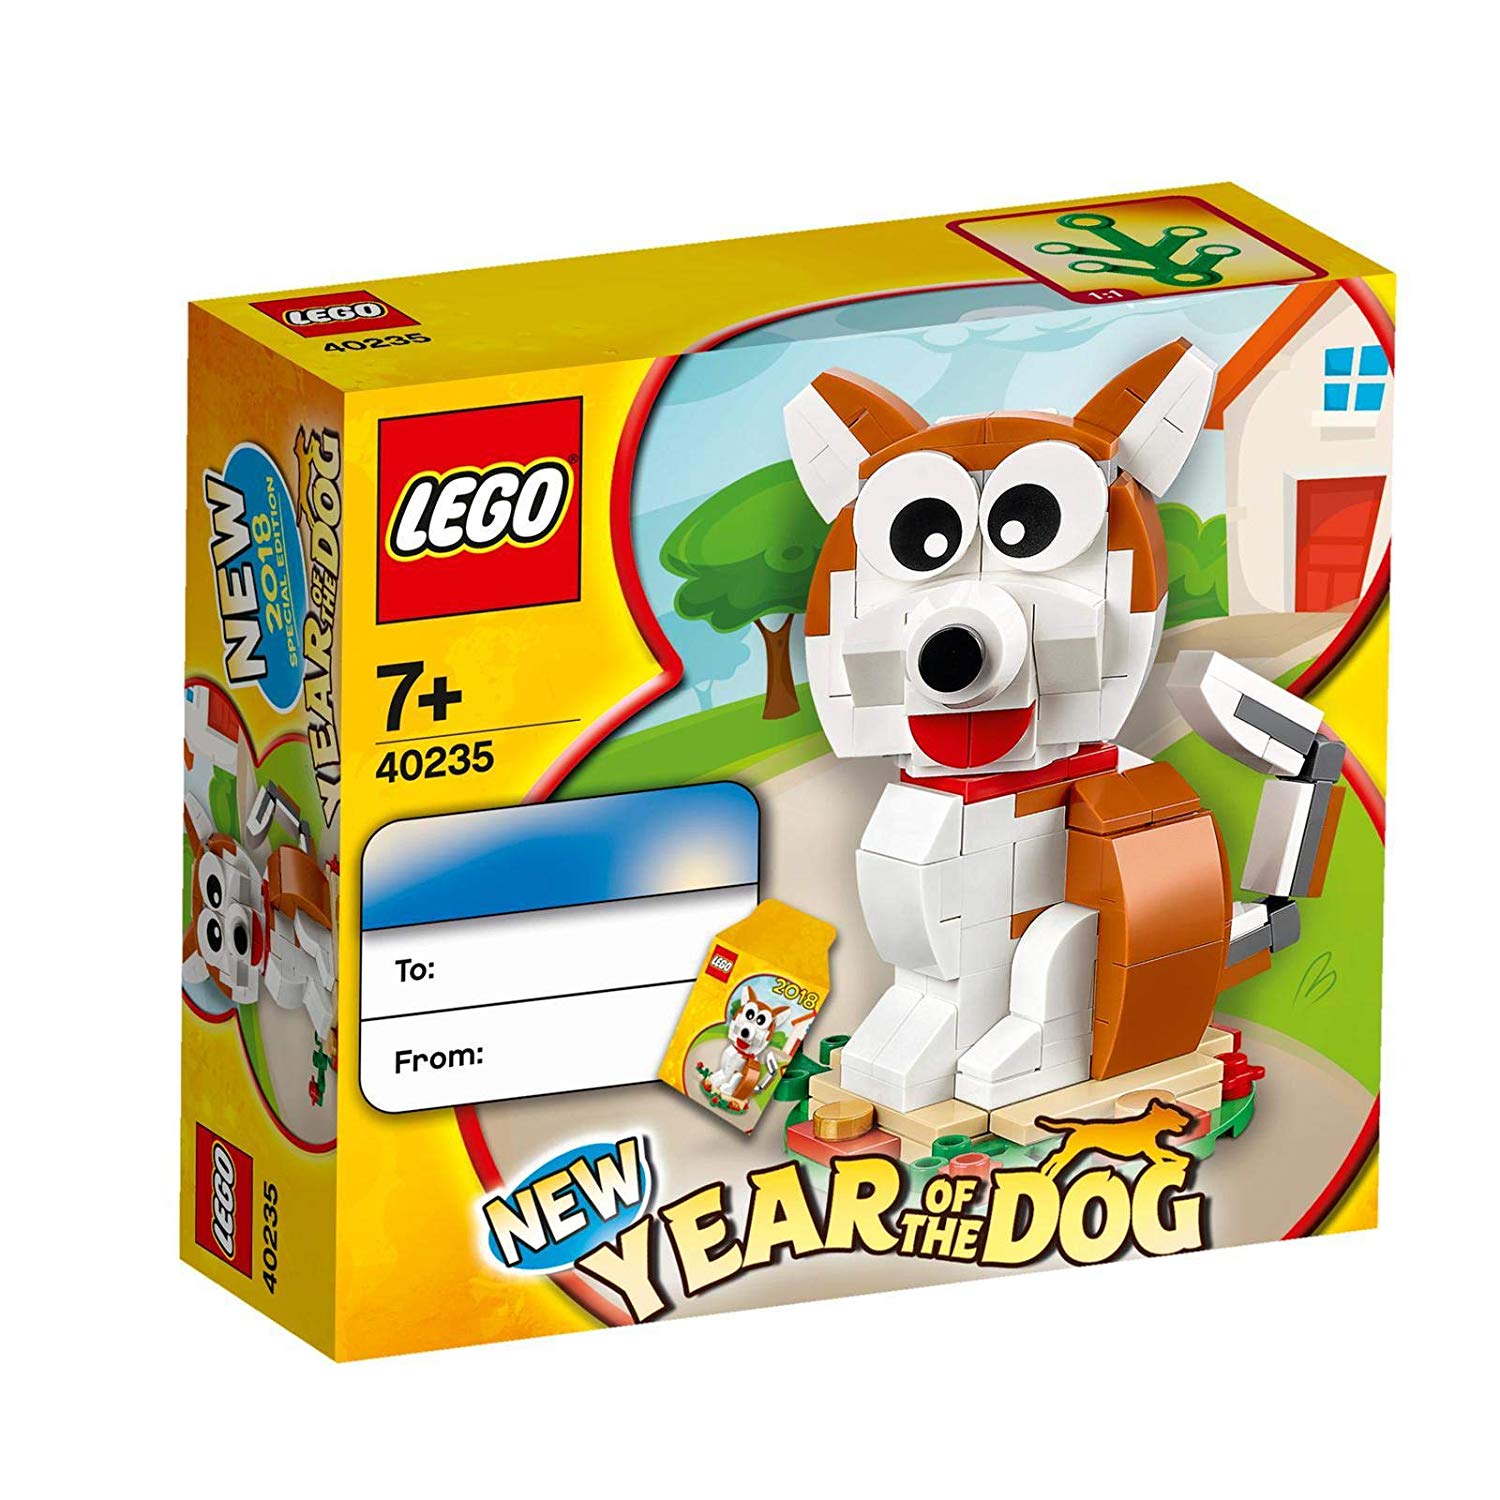 Lego Year Of The Dog - Runs The Year Of The Dog In Style!